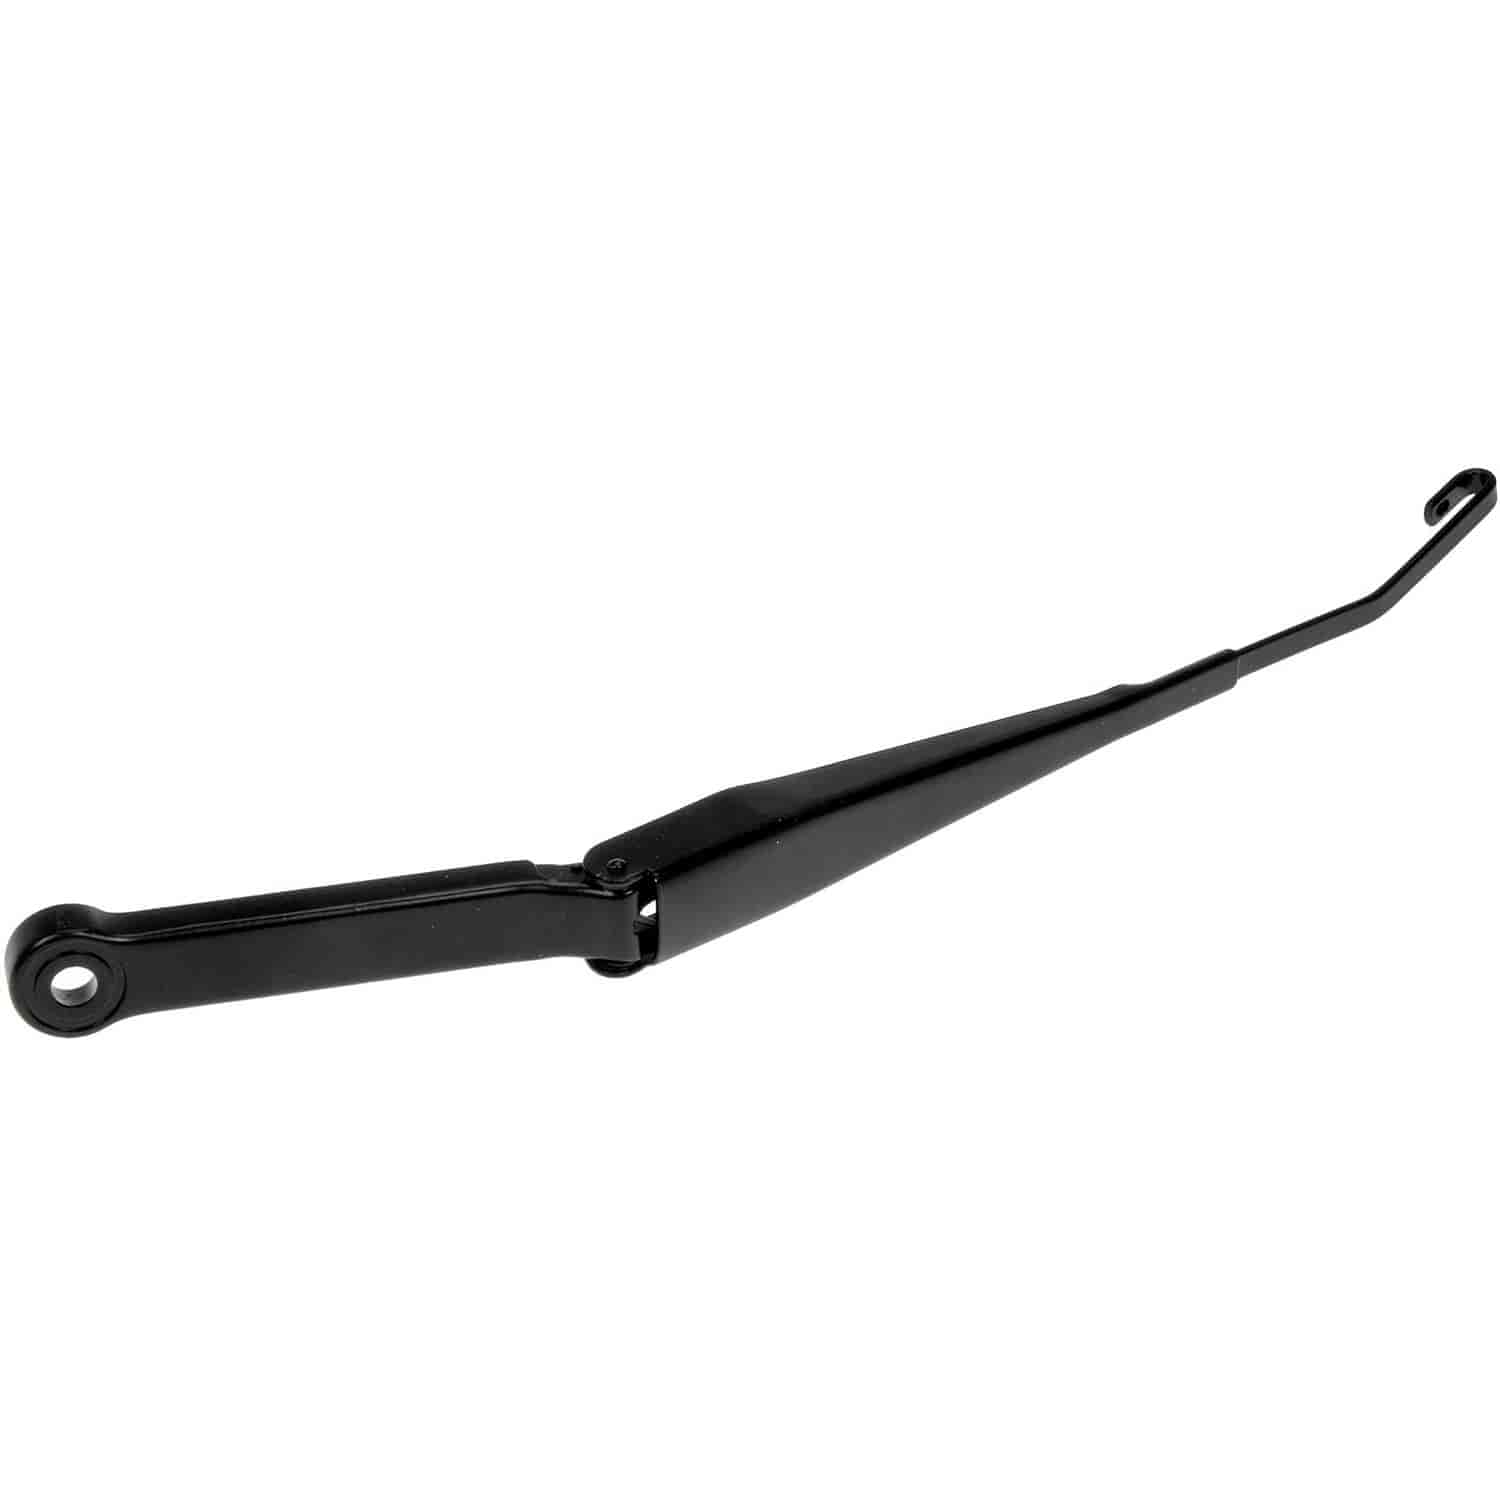 Replacement Windshield Wiper Arm